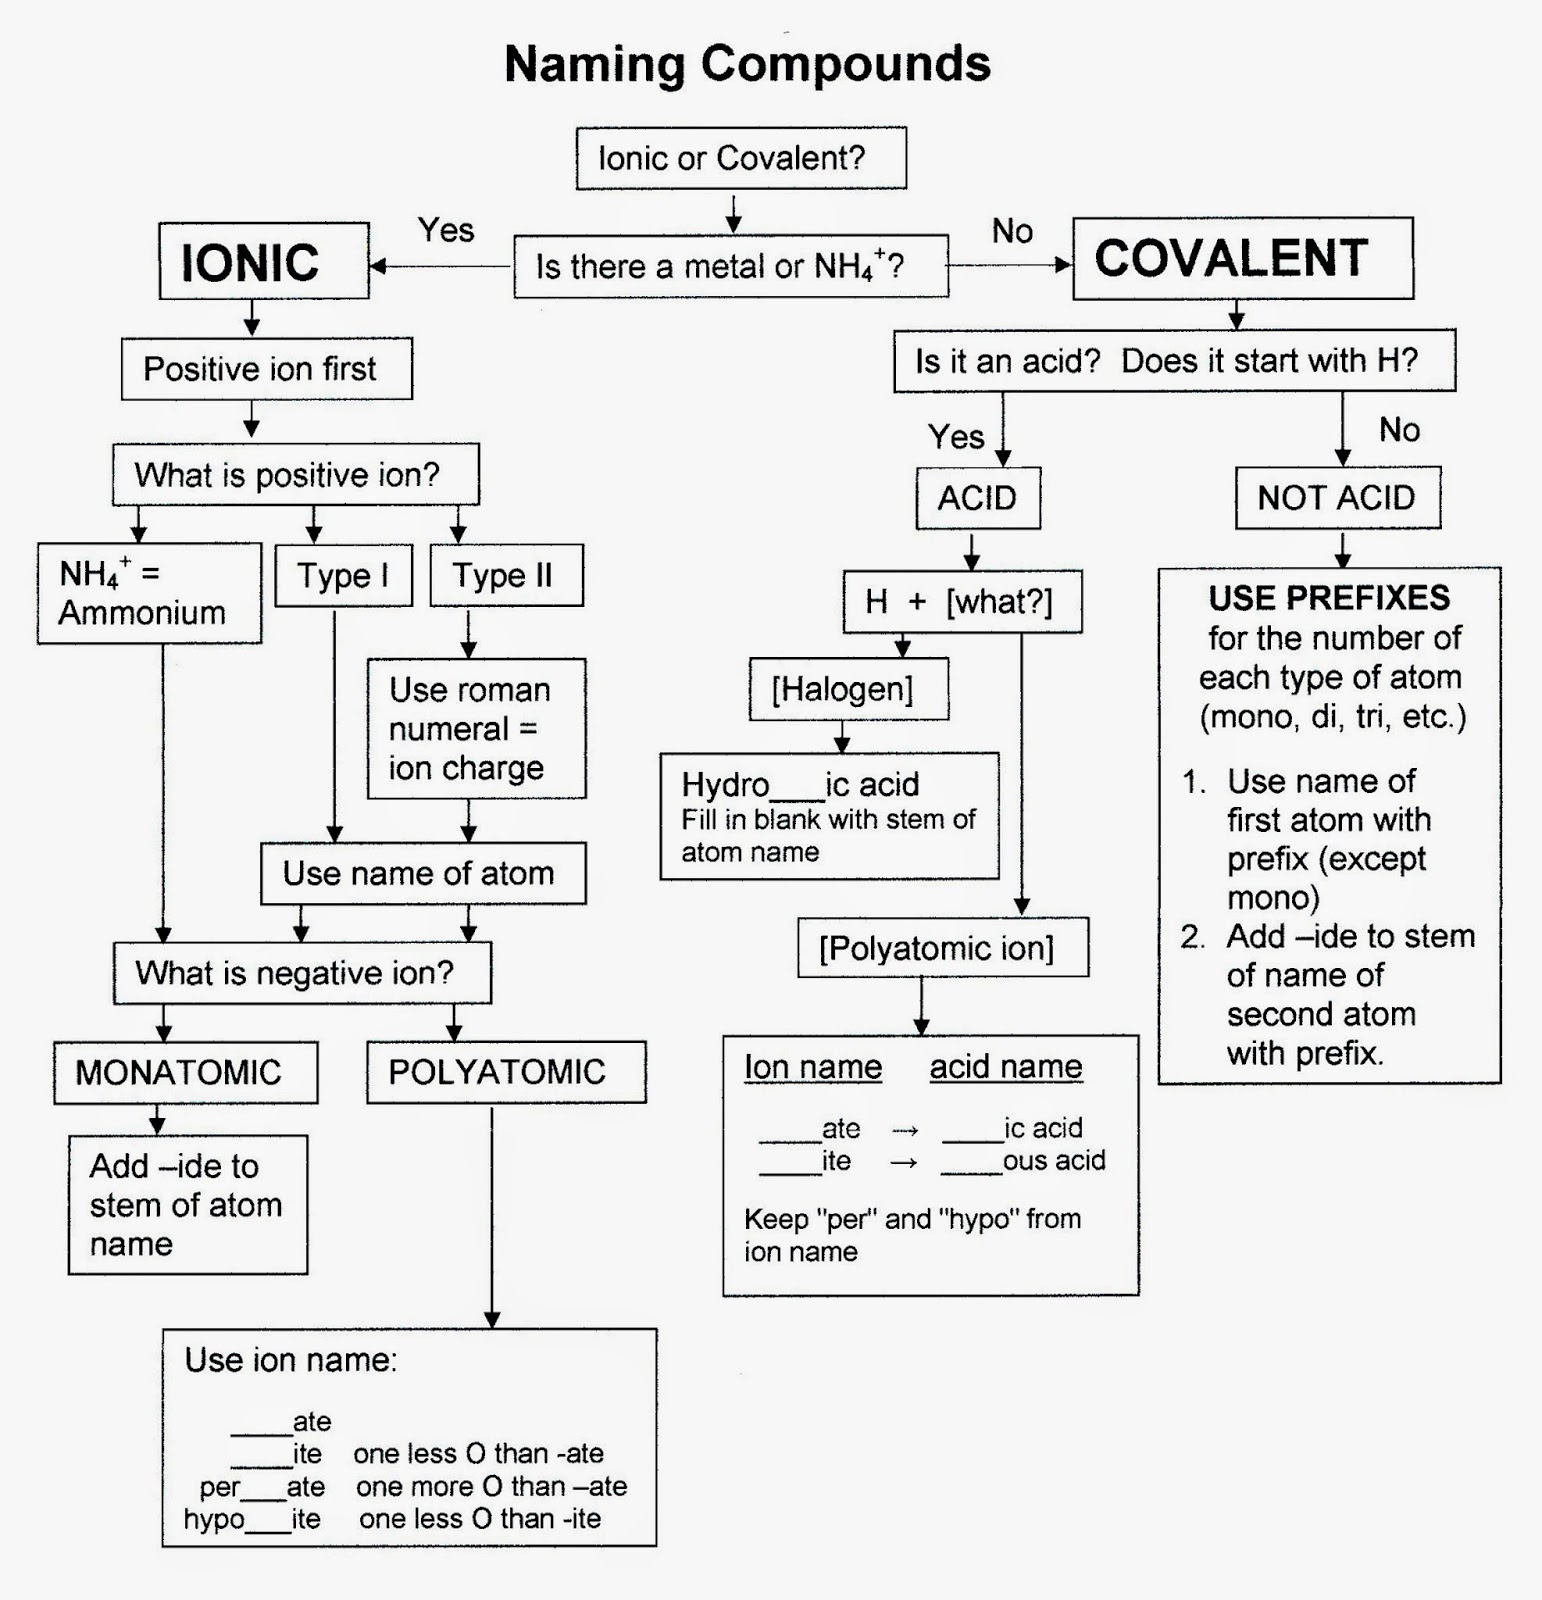 Chemistry And More Naming Compounds Flowchart